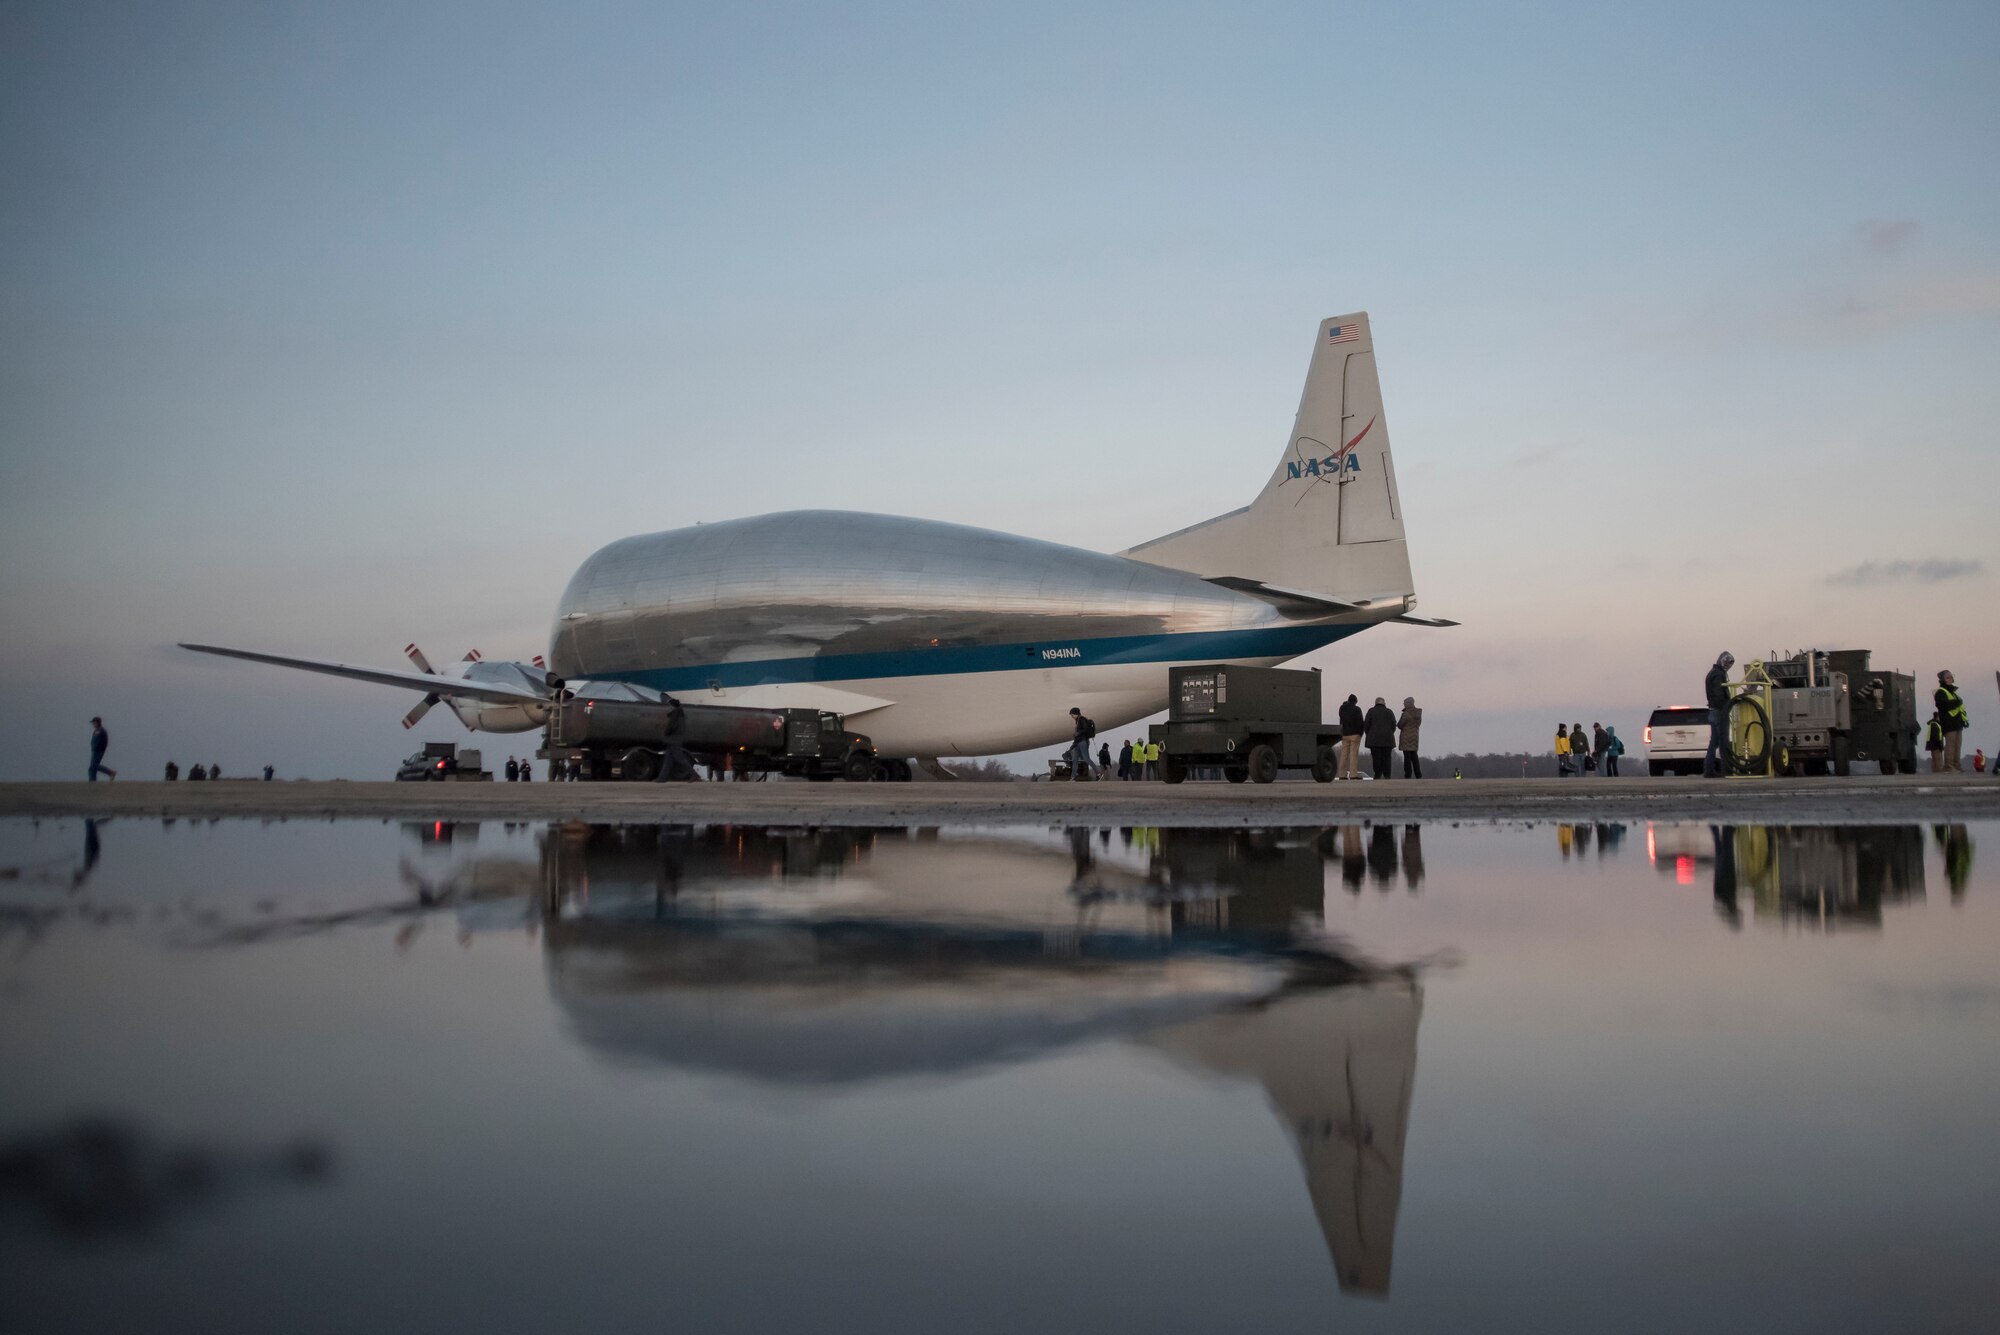 A photo of the NASA Super Guppy aircraft and it's reflection, parked on the flight line after a snow shower melted